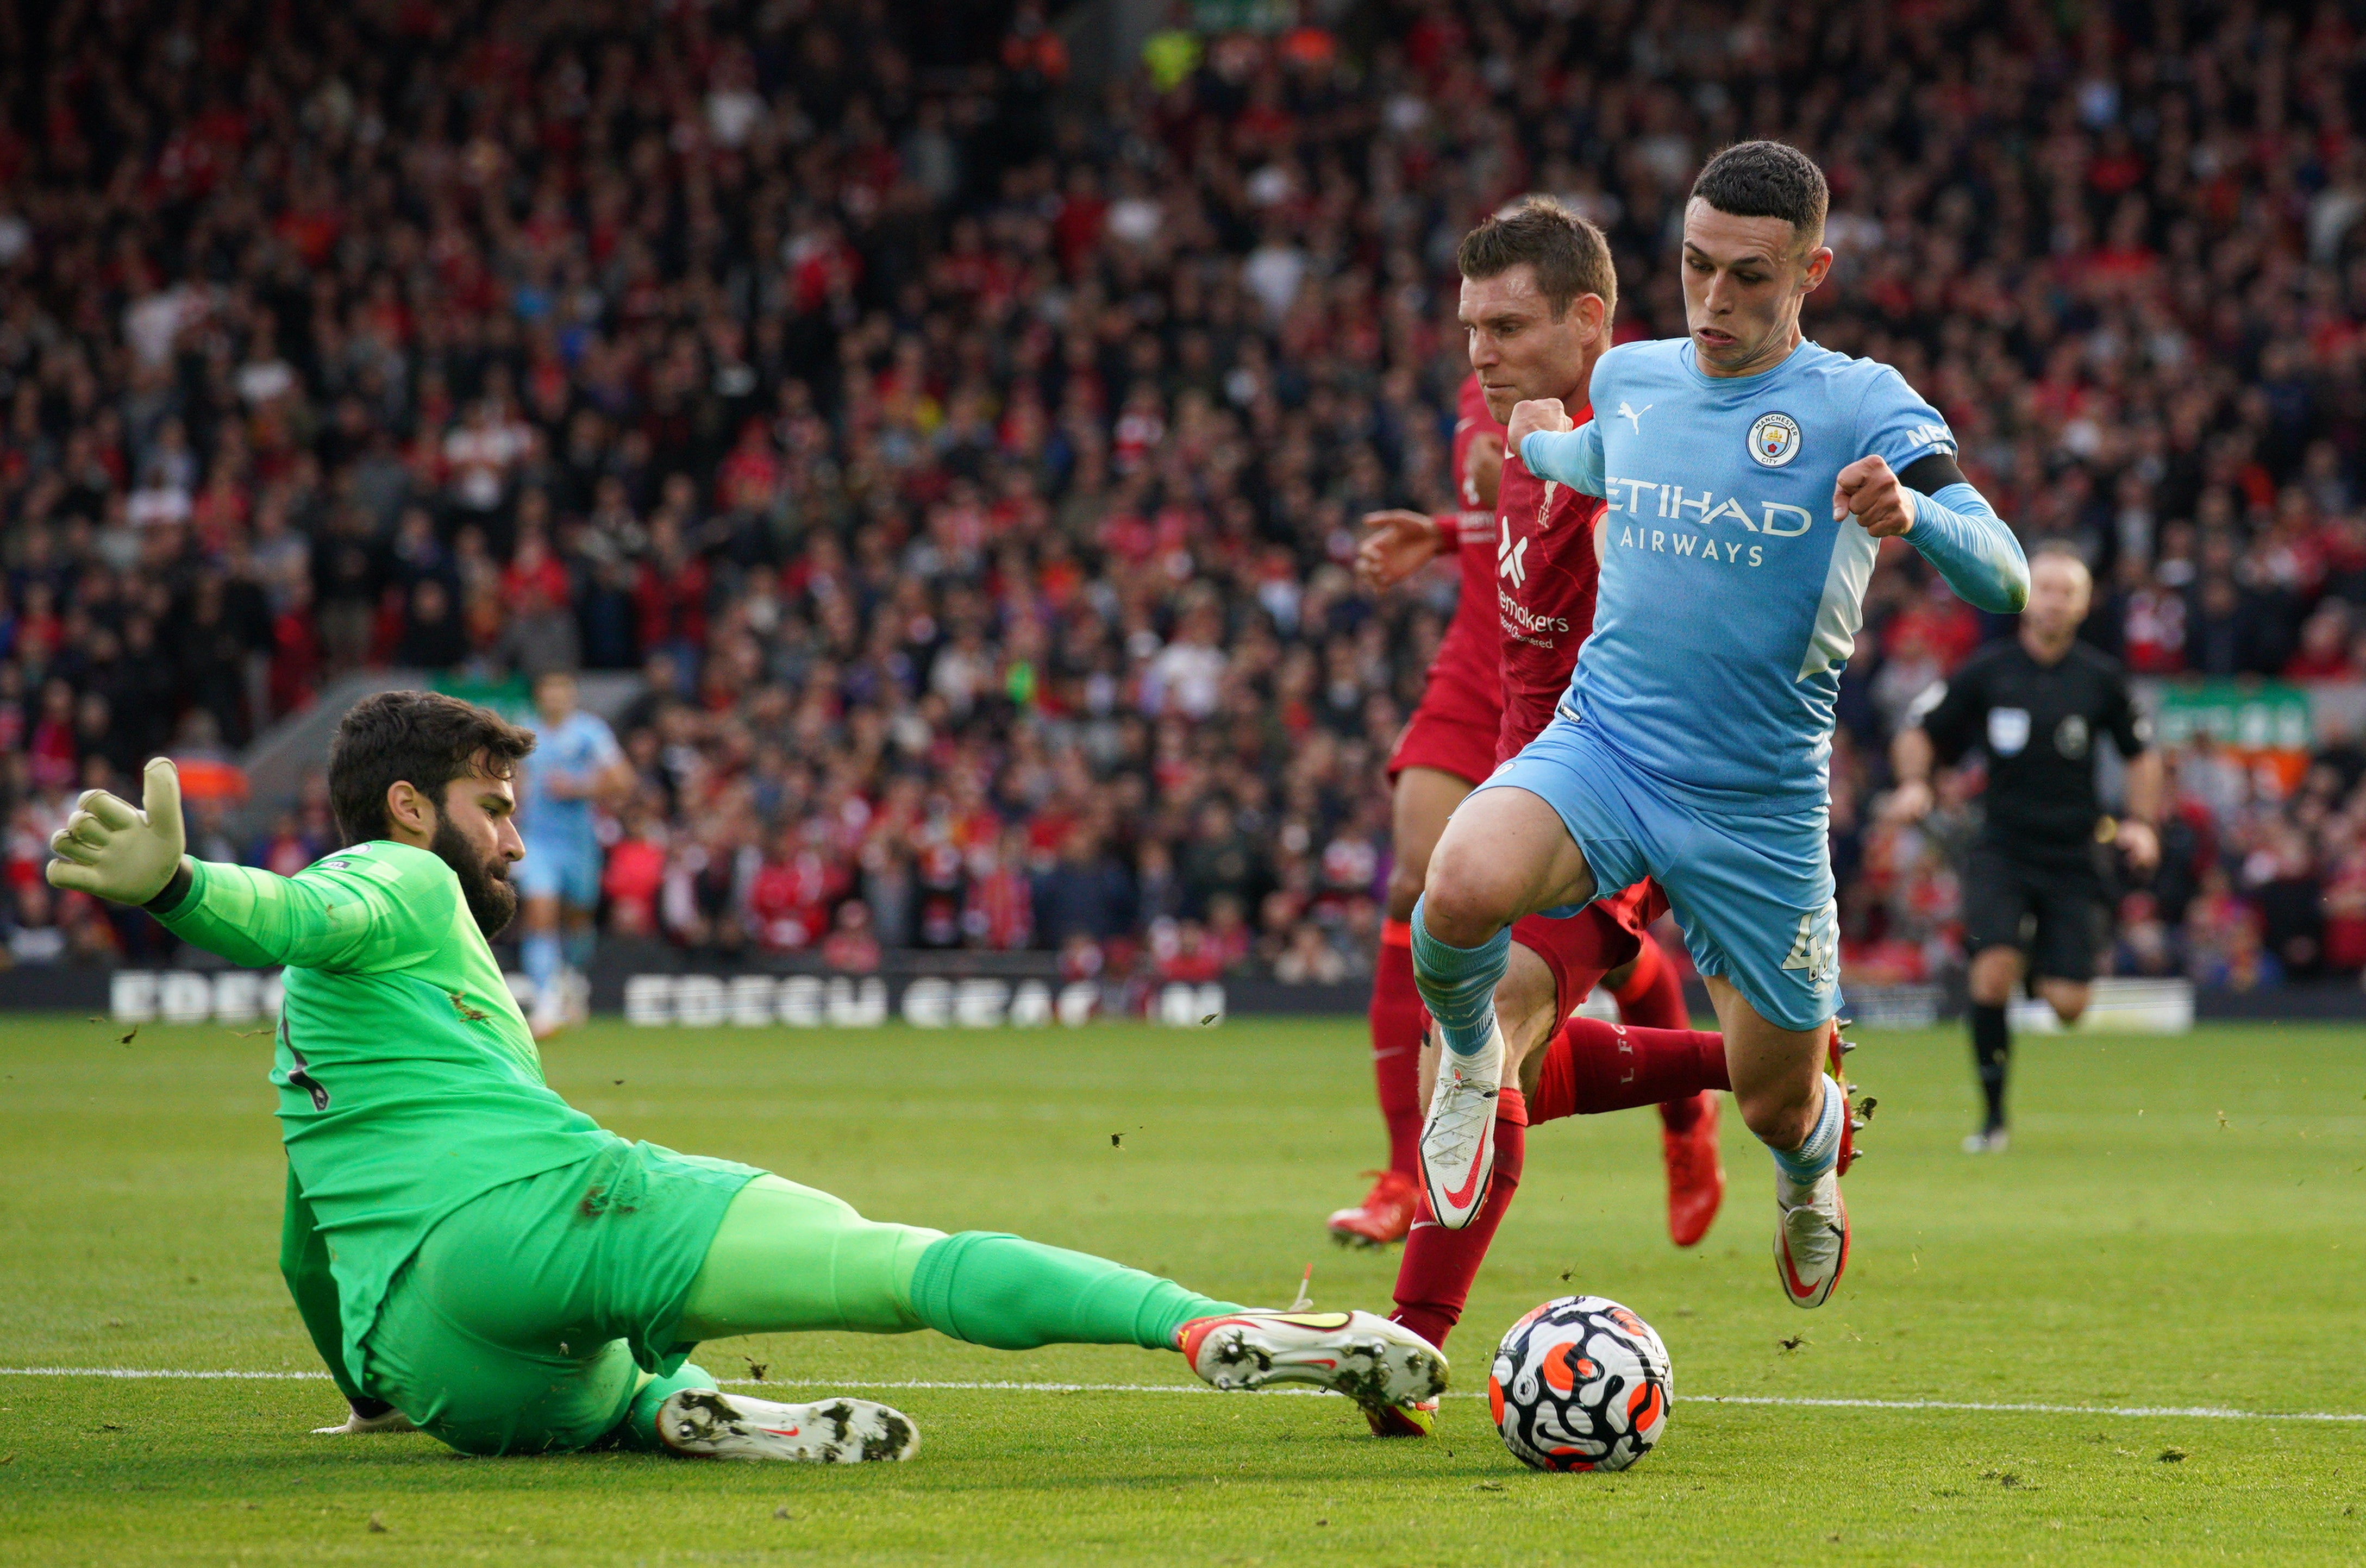 Liverpool goalkeeper Alisson Becker has already played a crucial part against Manchester City this season (Peter Byrne/PA)